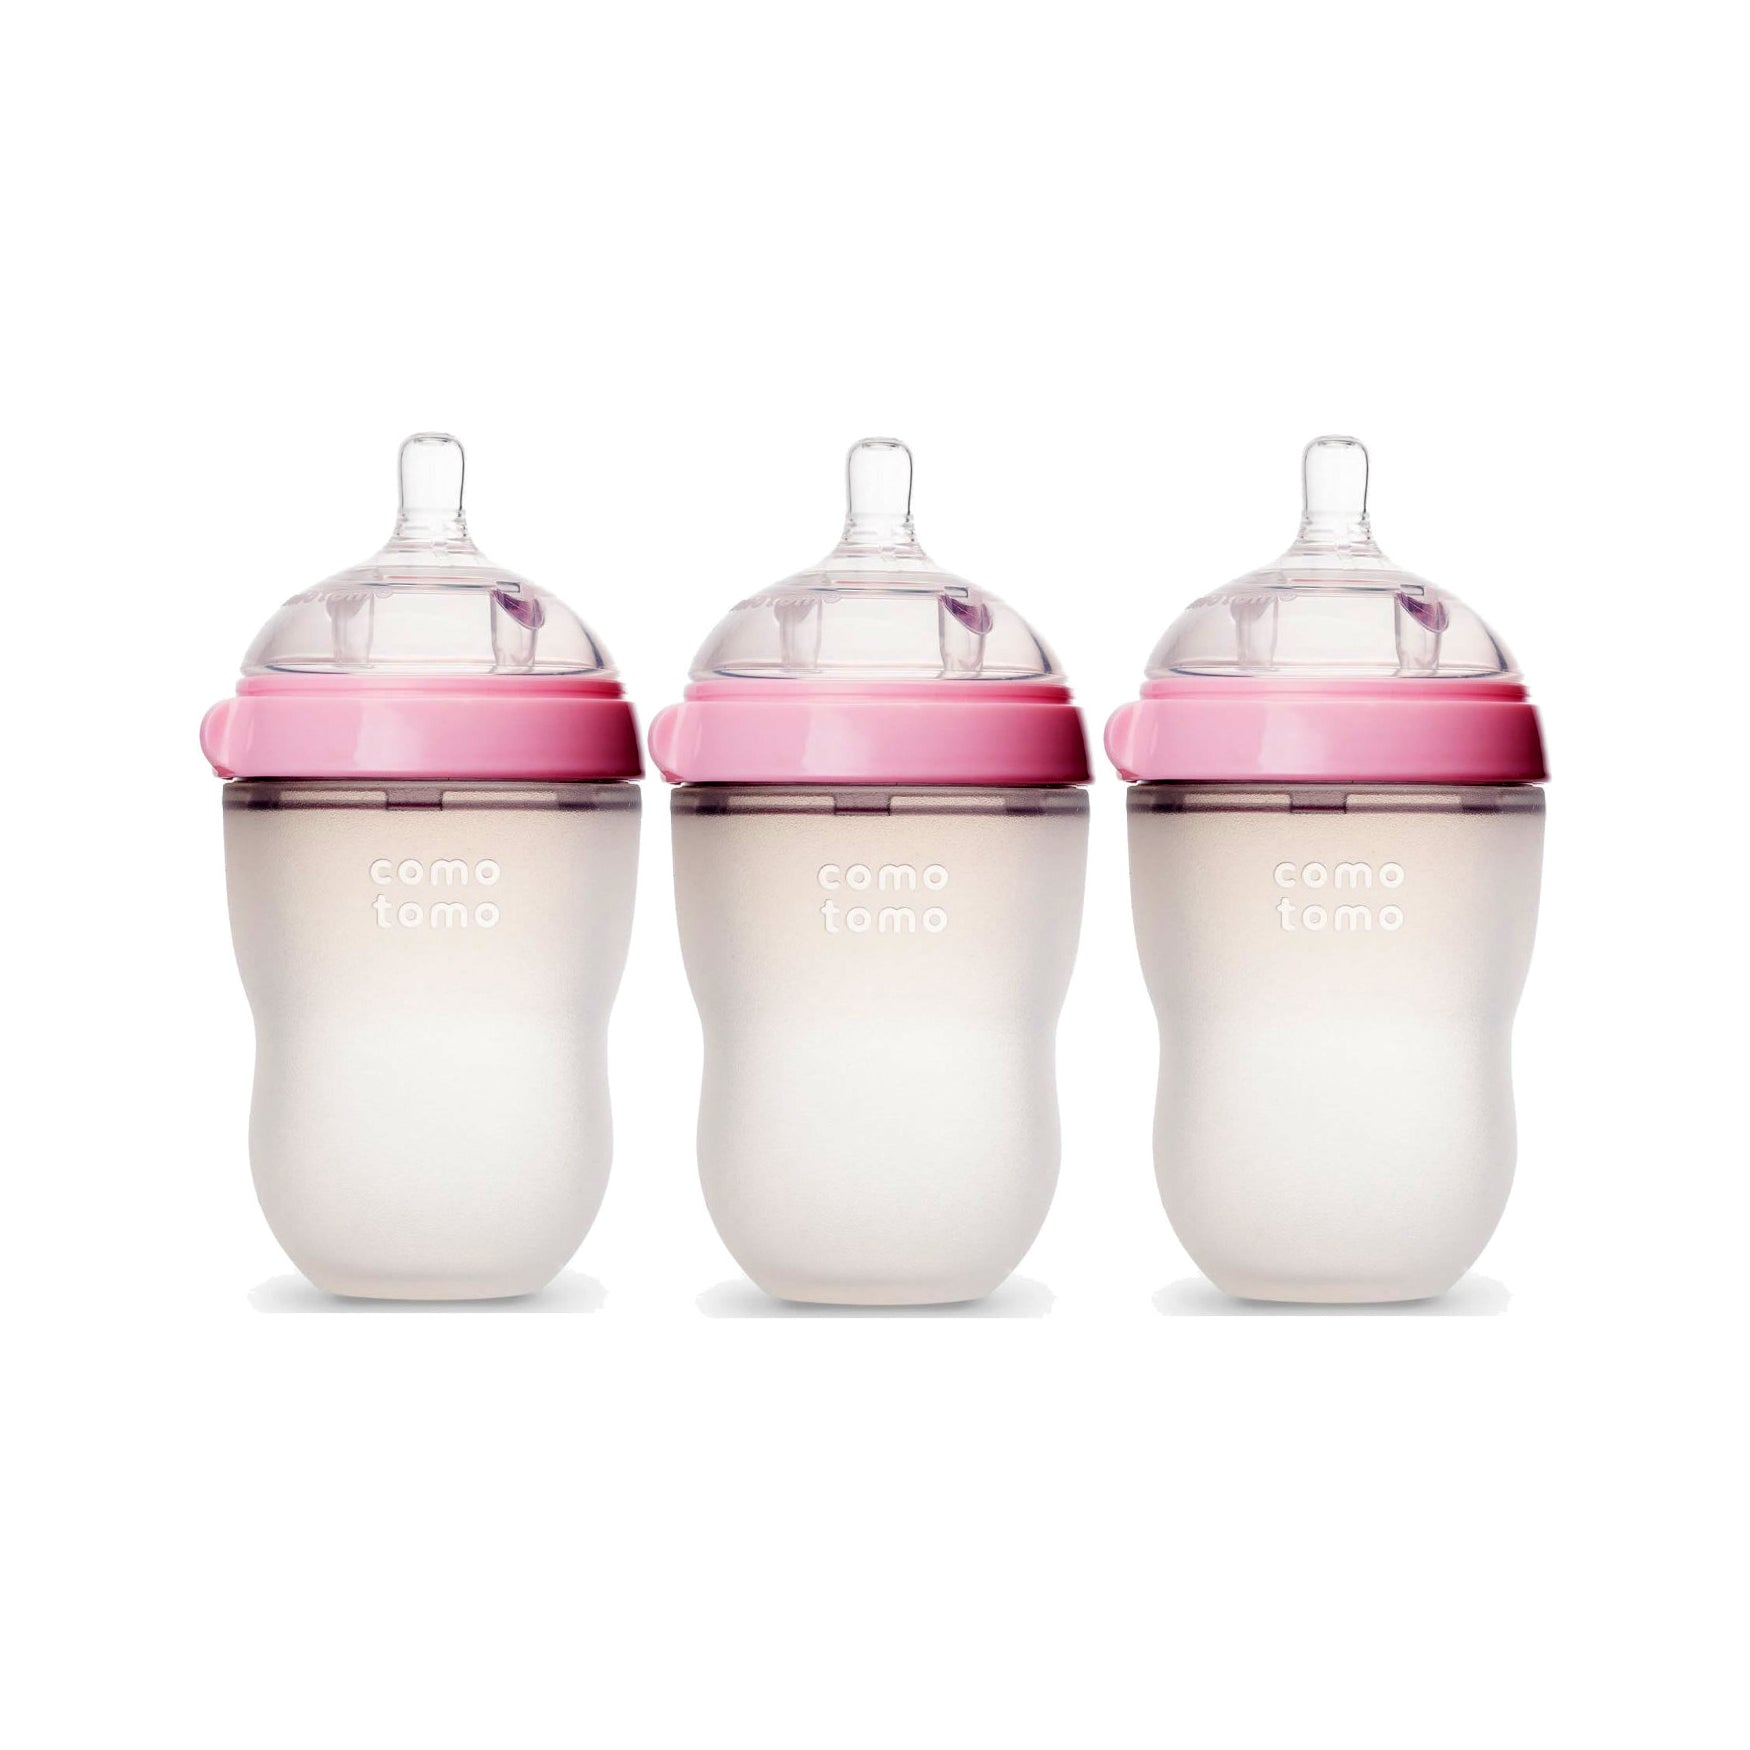 Comotomo Baby Bottle 8-Ounce/250 ml Kit, Pink, Pack of 3 - ANB Baby -$20 - $50